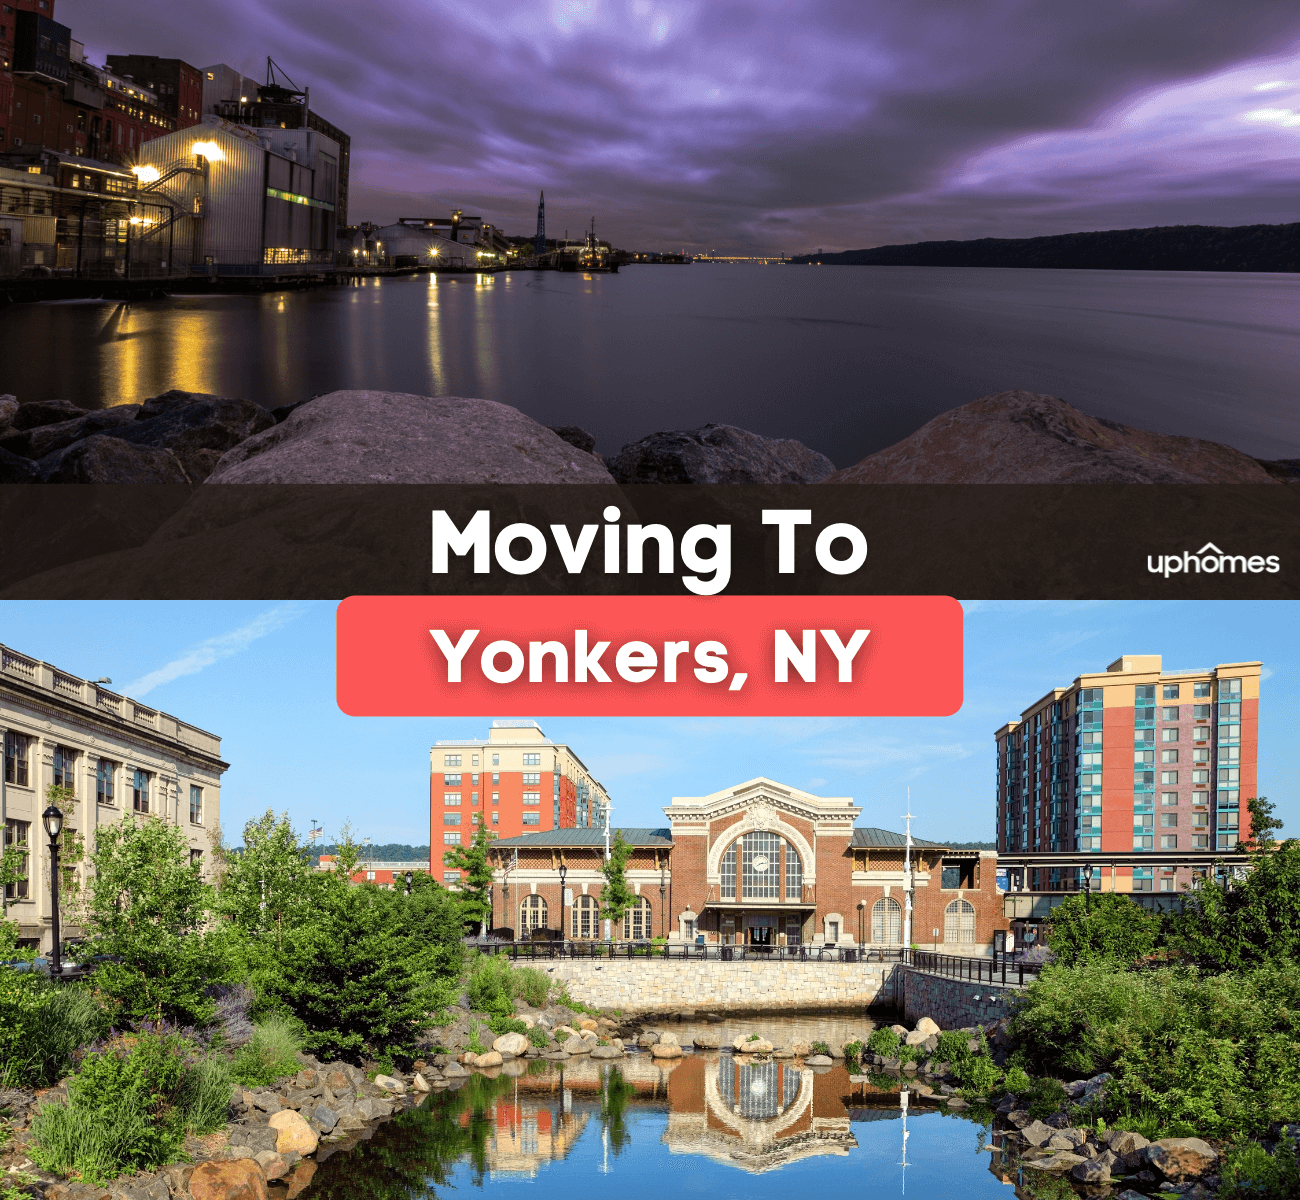 Moving to Yonkers, NY - What is it like living in Yonkers?